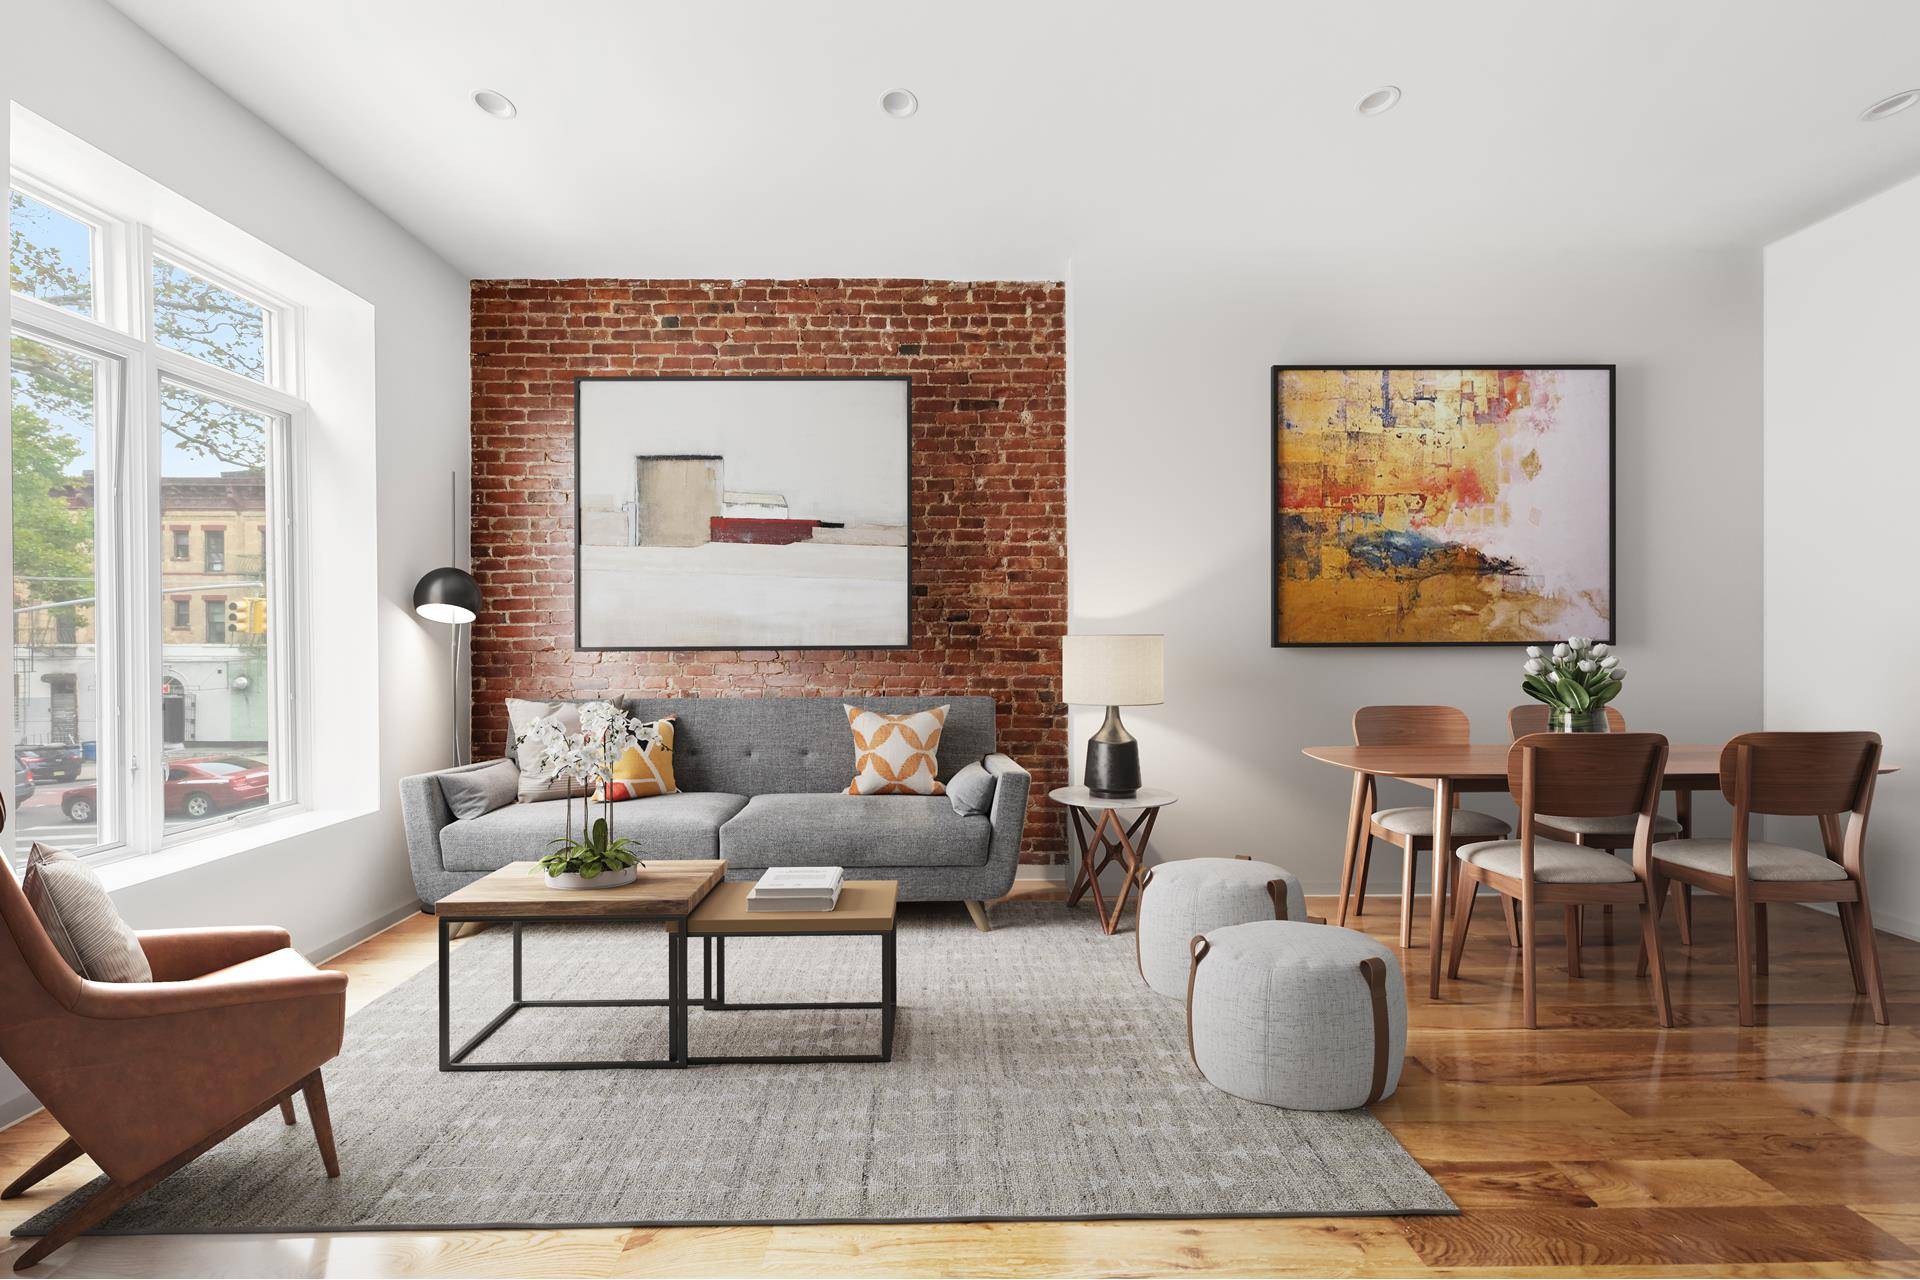 756 St. Johns Place is a newly renovated four unit boutique townhouse condominium located in the heart of Crown Heights.